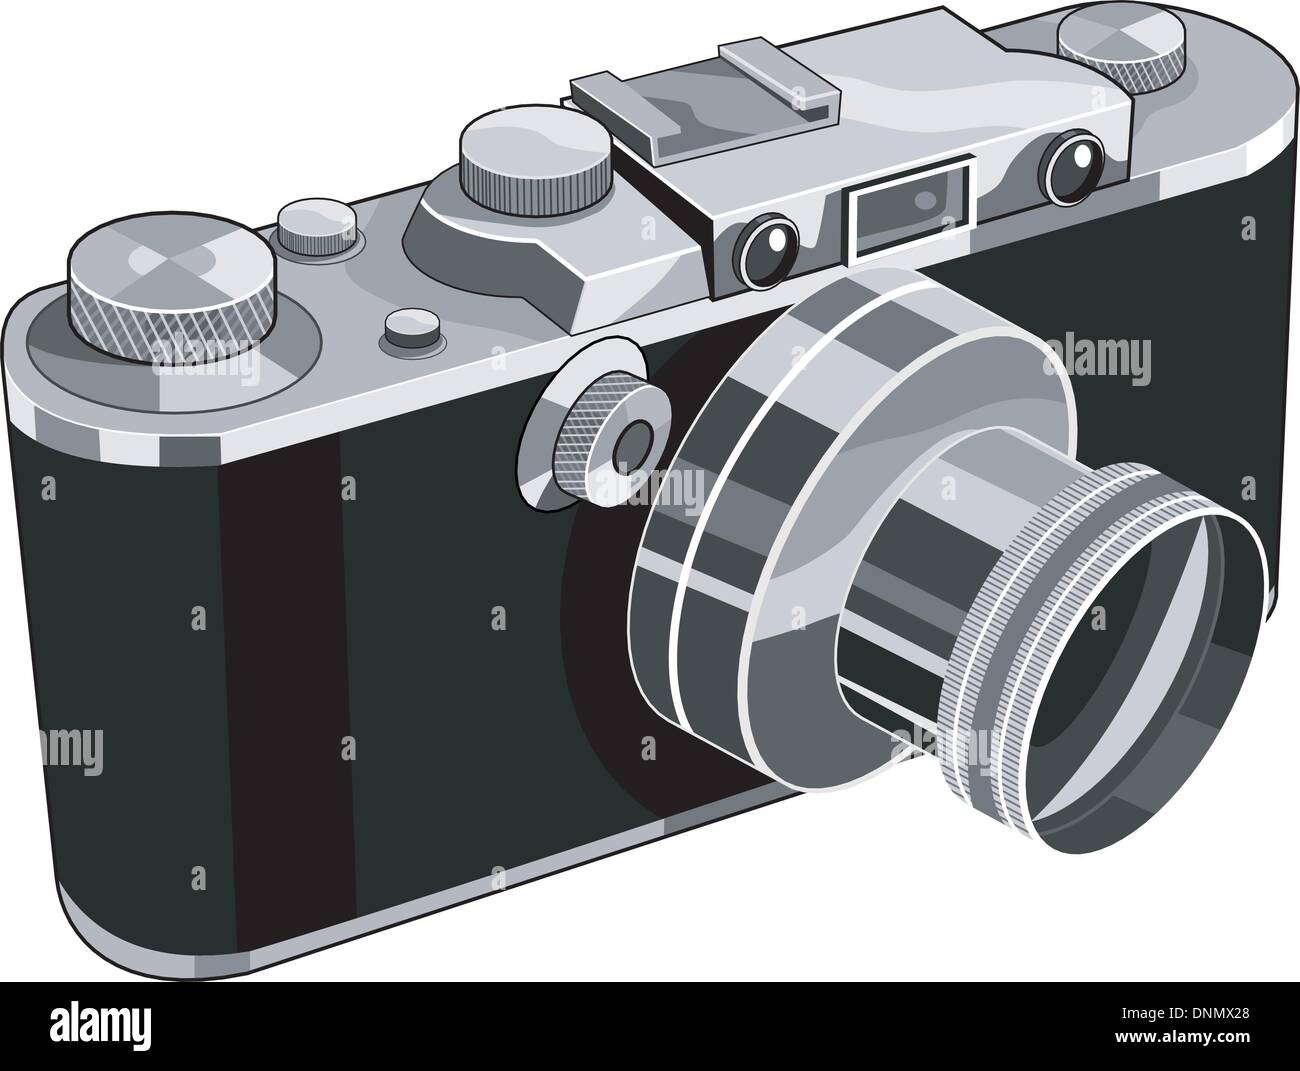 Illustration of a vintage camera done in retro style. Stock Vector